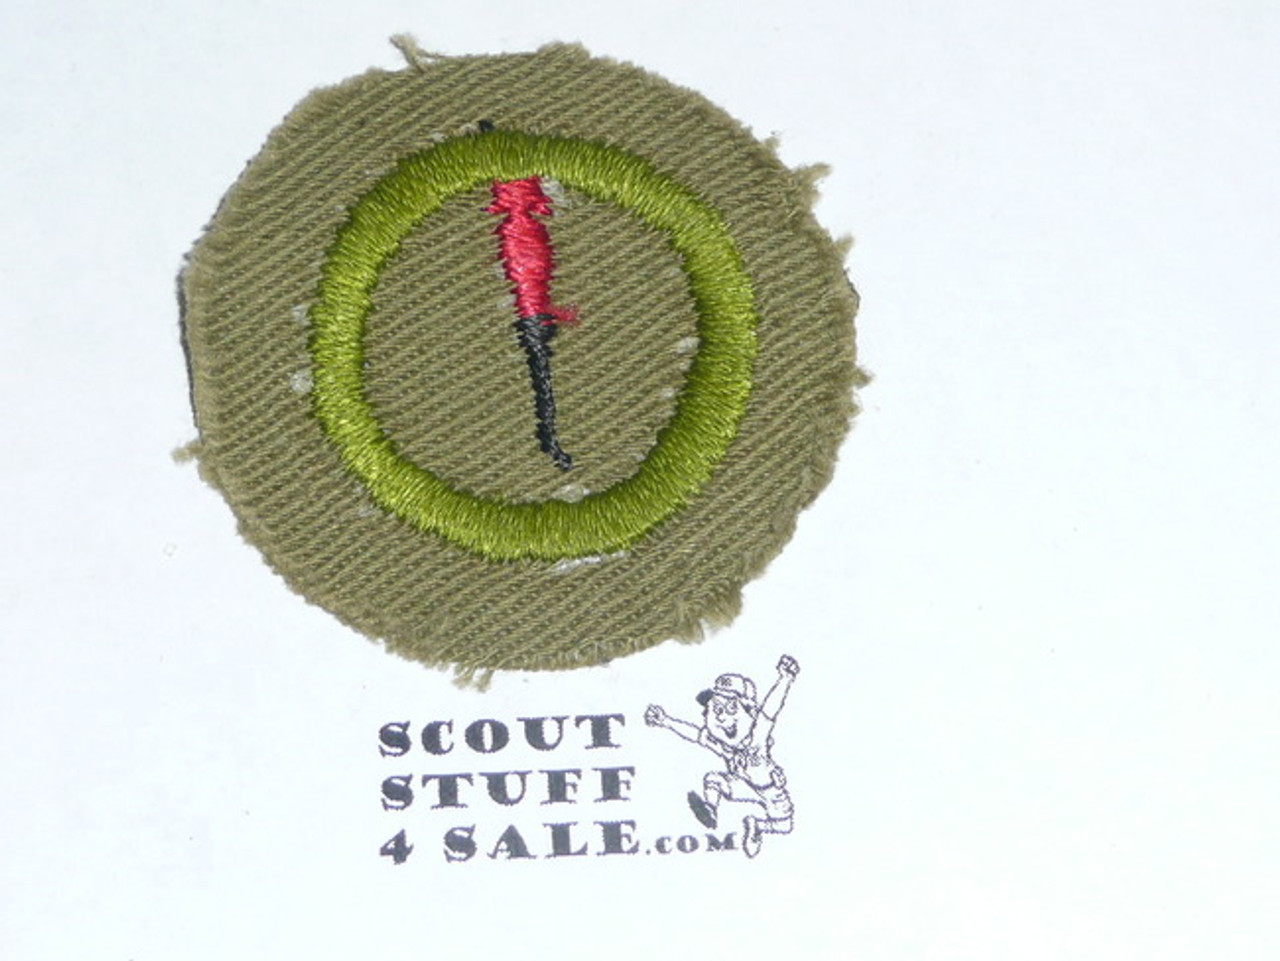 Leatherworking - Type A - Square Tan Merit Badge (1911-1933), cut down from square